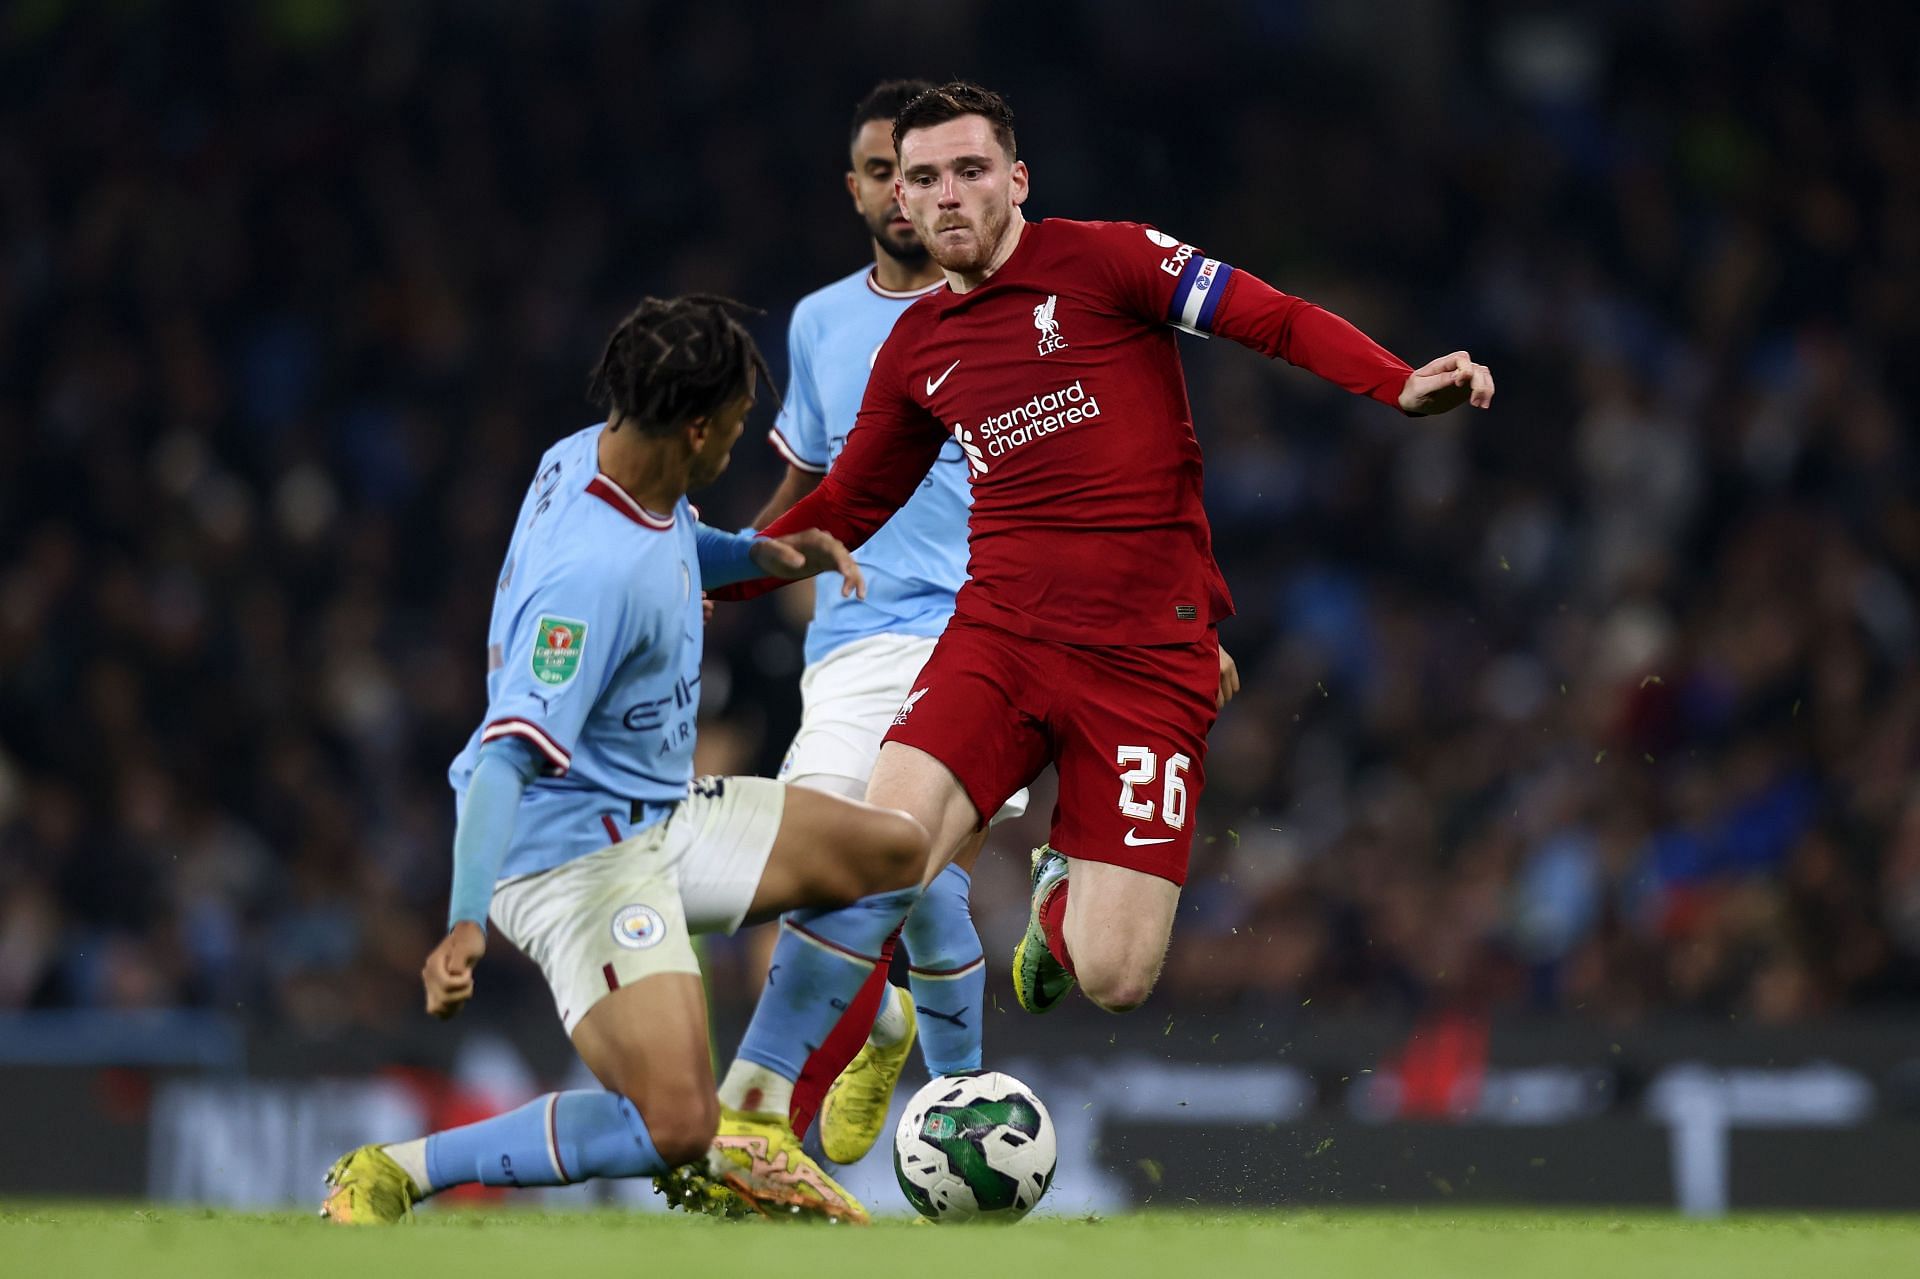 Robertson has eight assists in all competitions this season